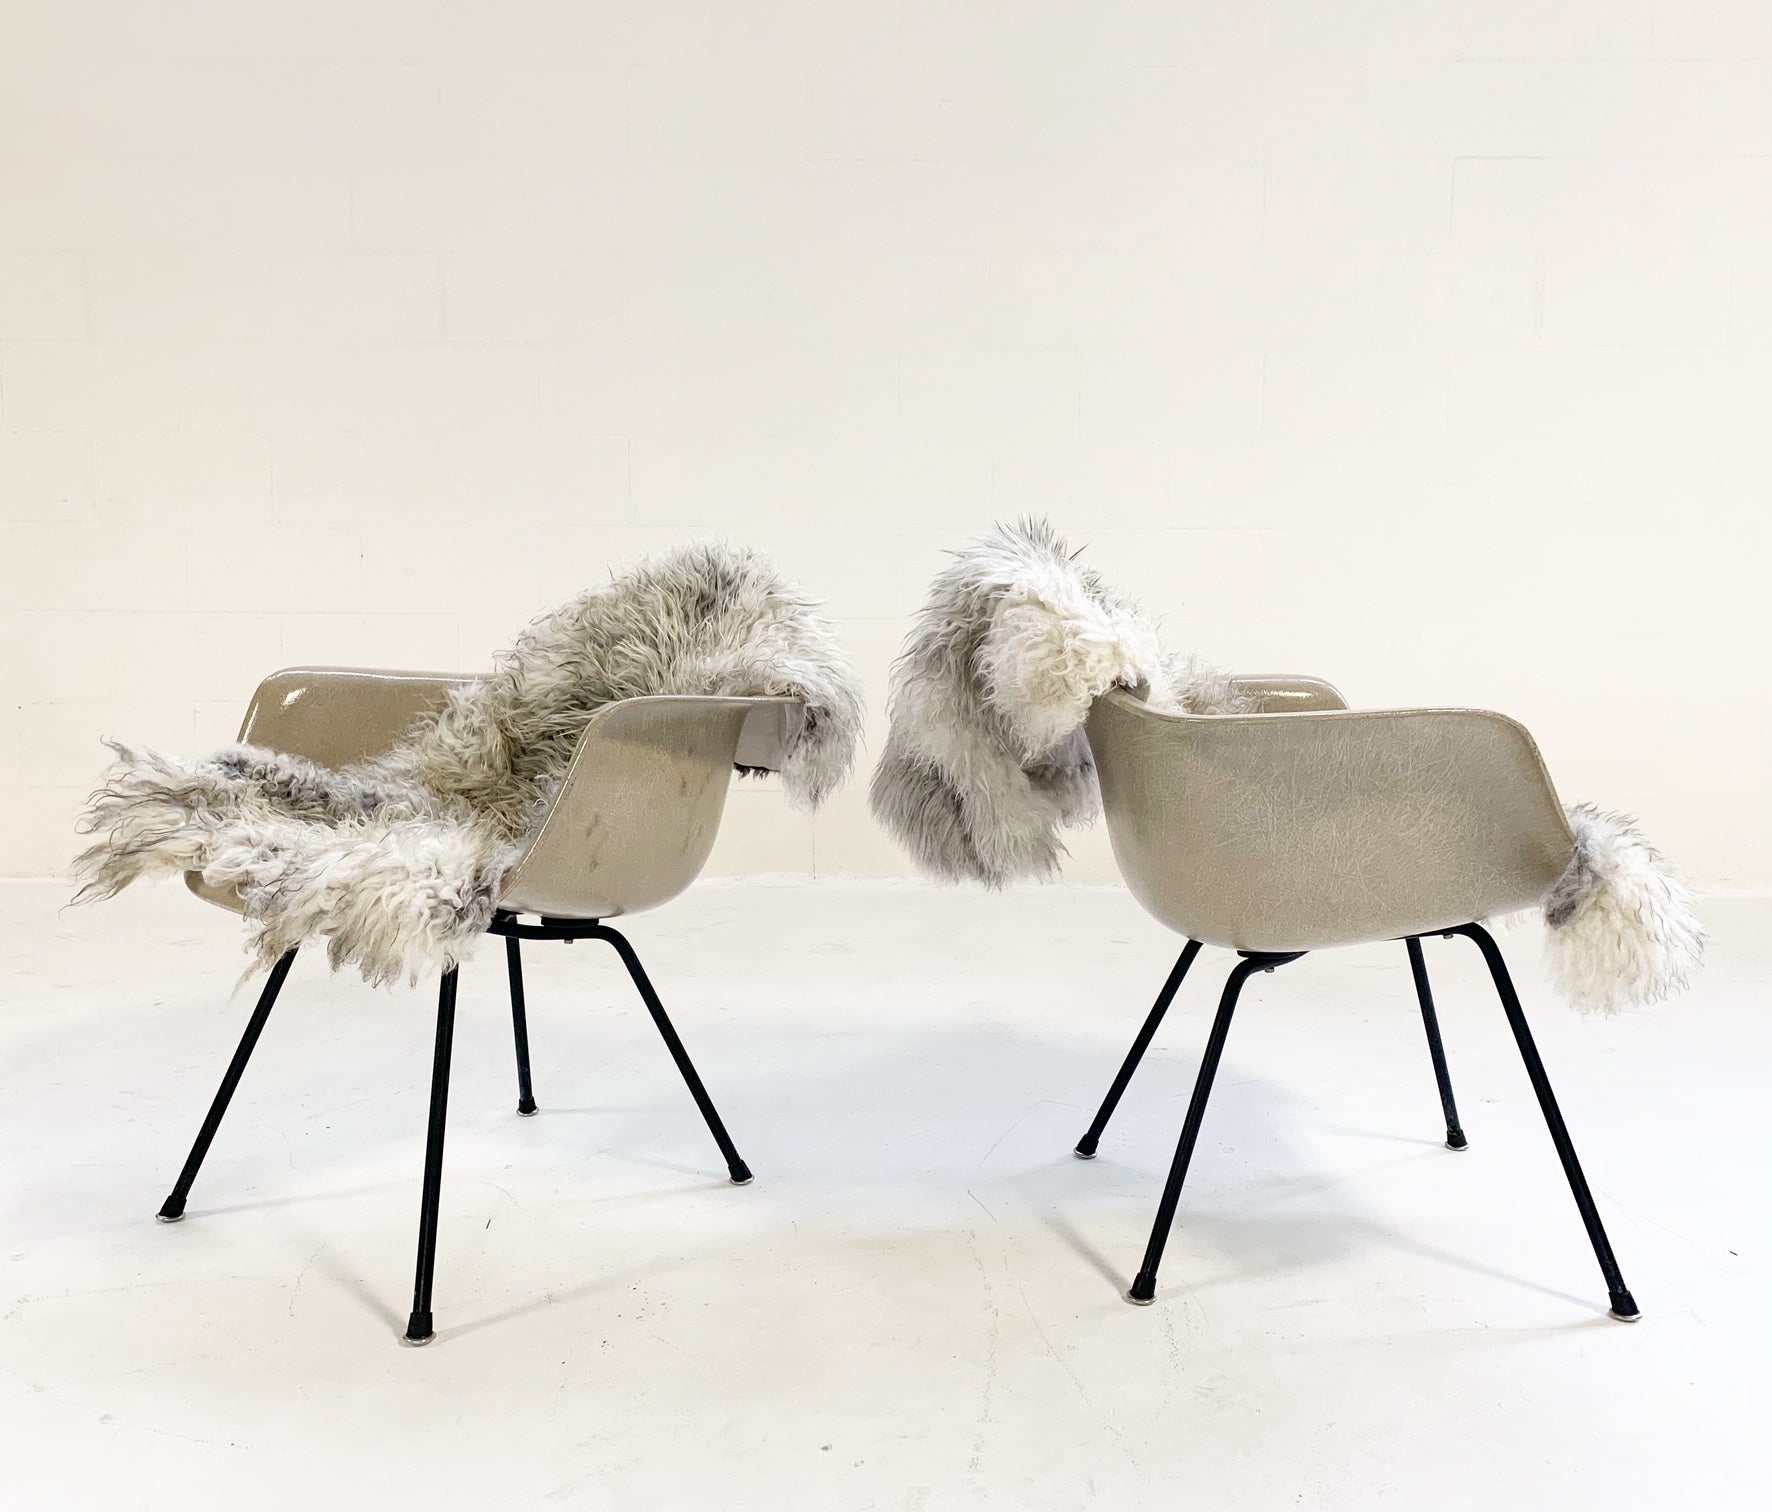 DAX Chairs with Sheepskins, Pair - FORSYTH